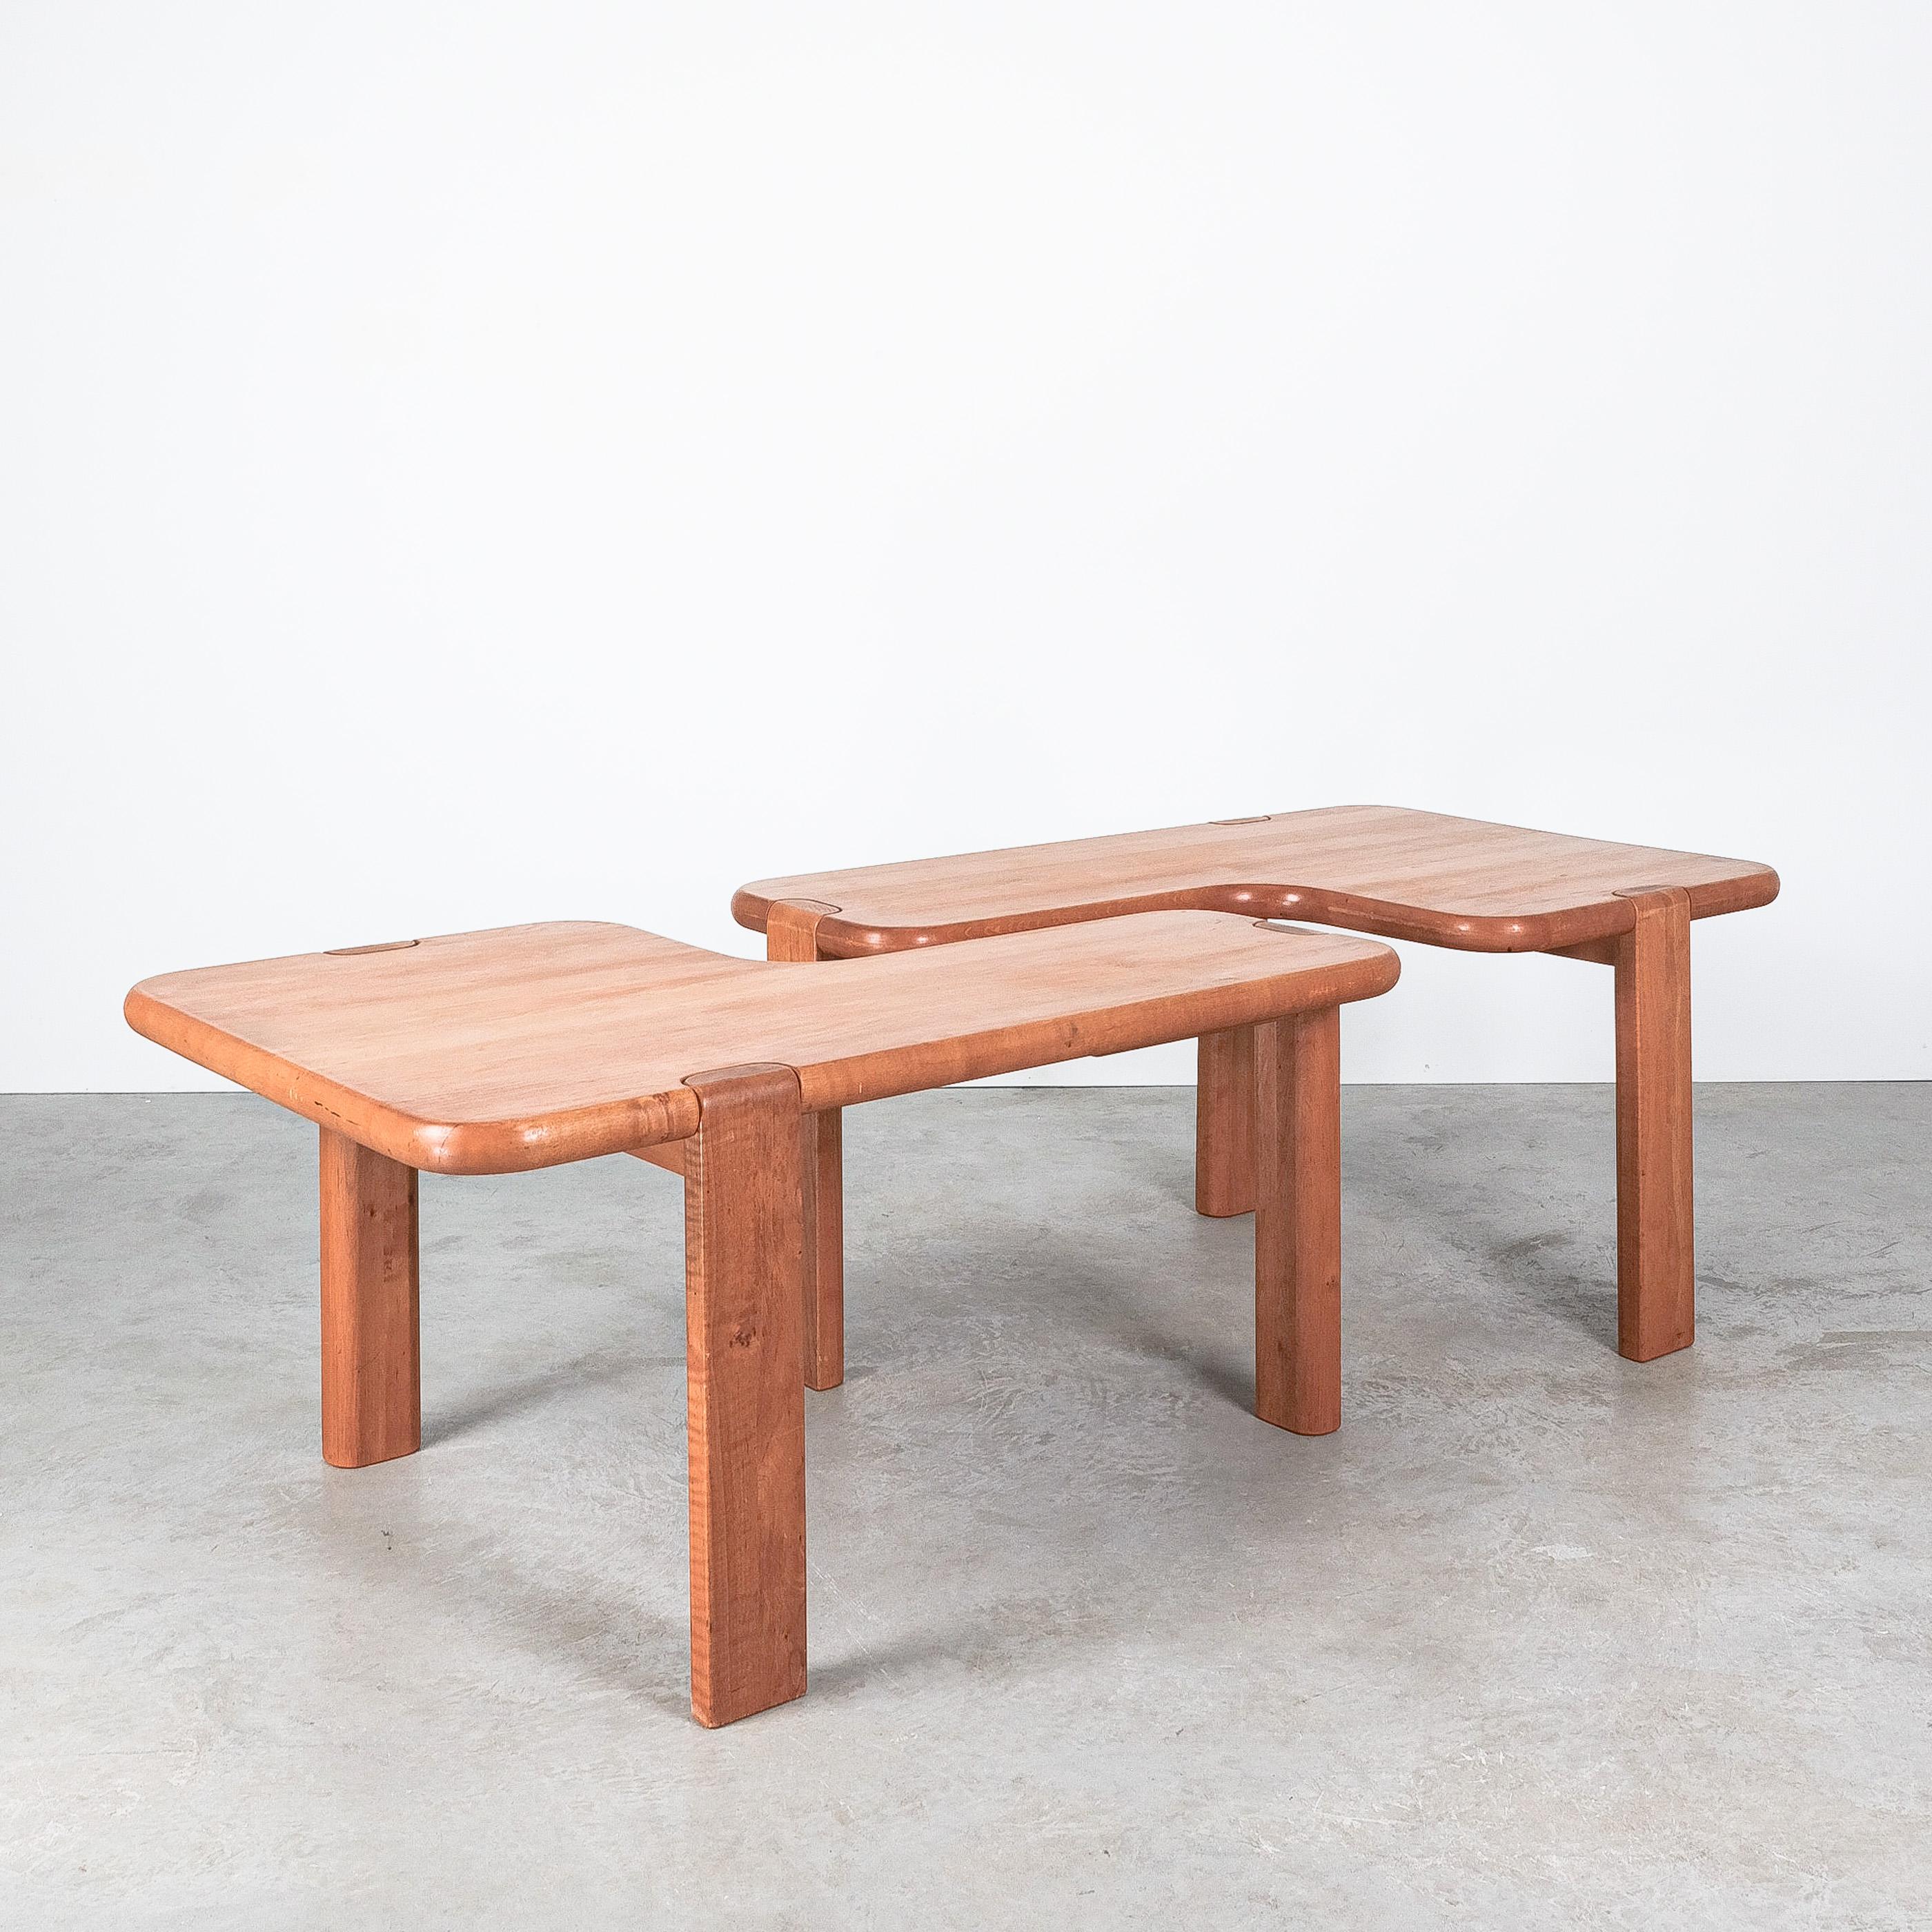 Aksel Kjersgaard Pair of Pine Wood Coffee Tables, Denmark, circa 1970 In Good Condition For Sale In Vienna, AT